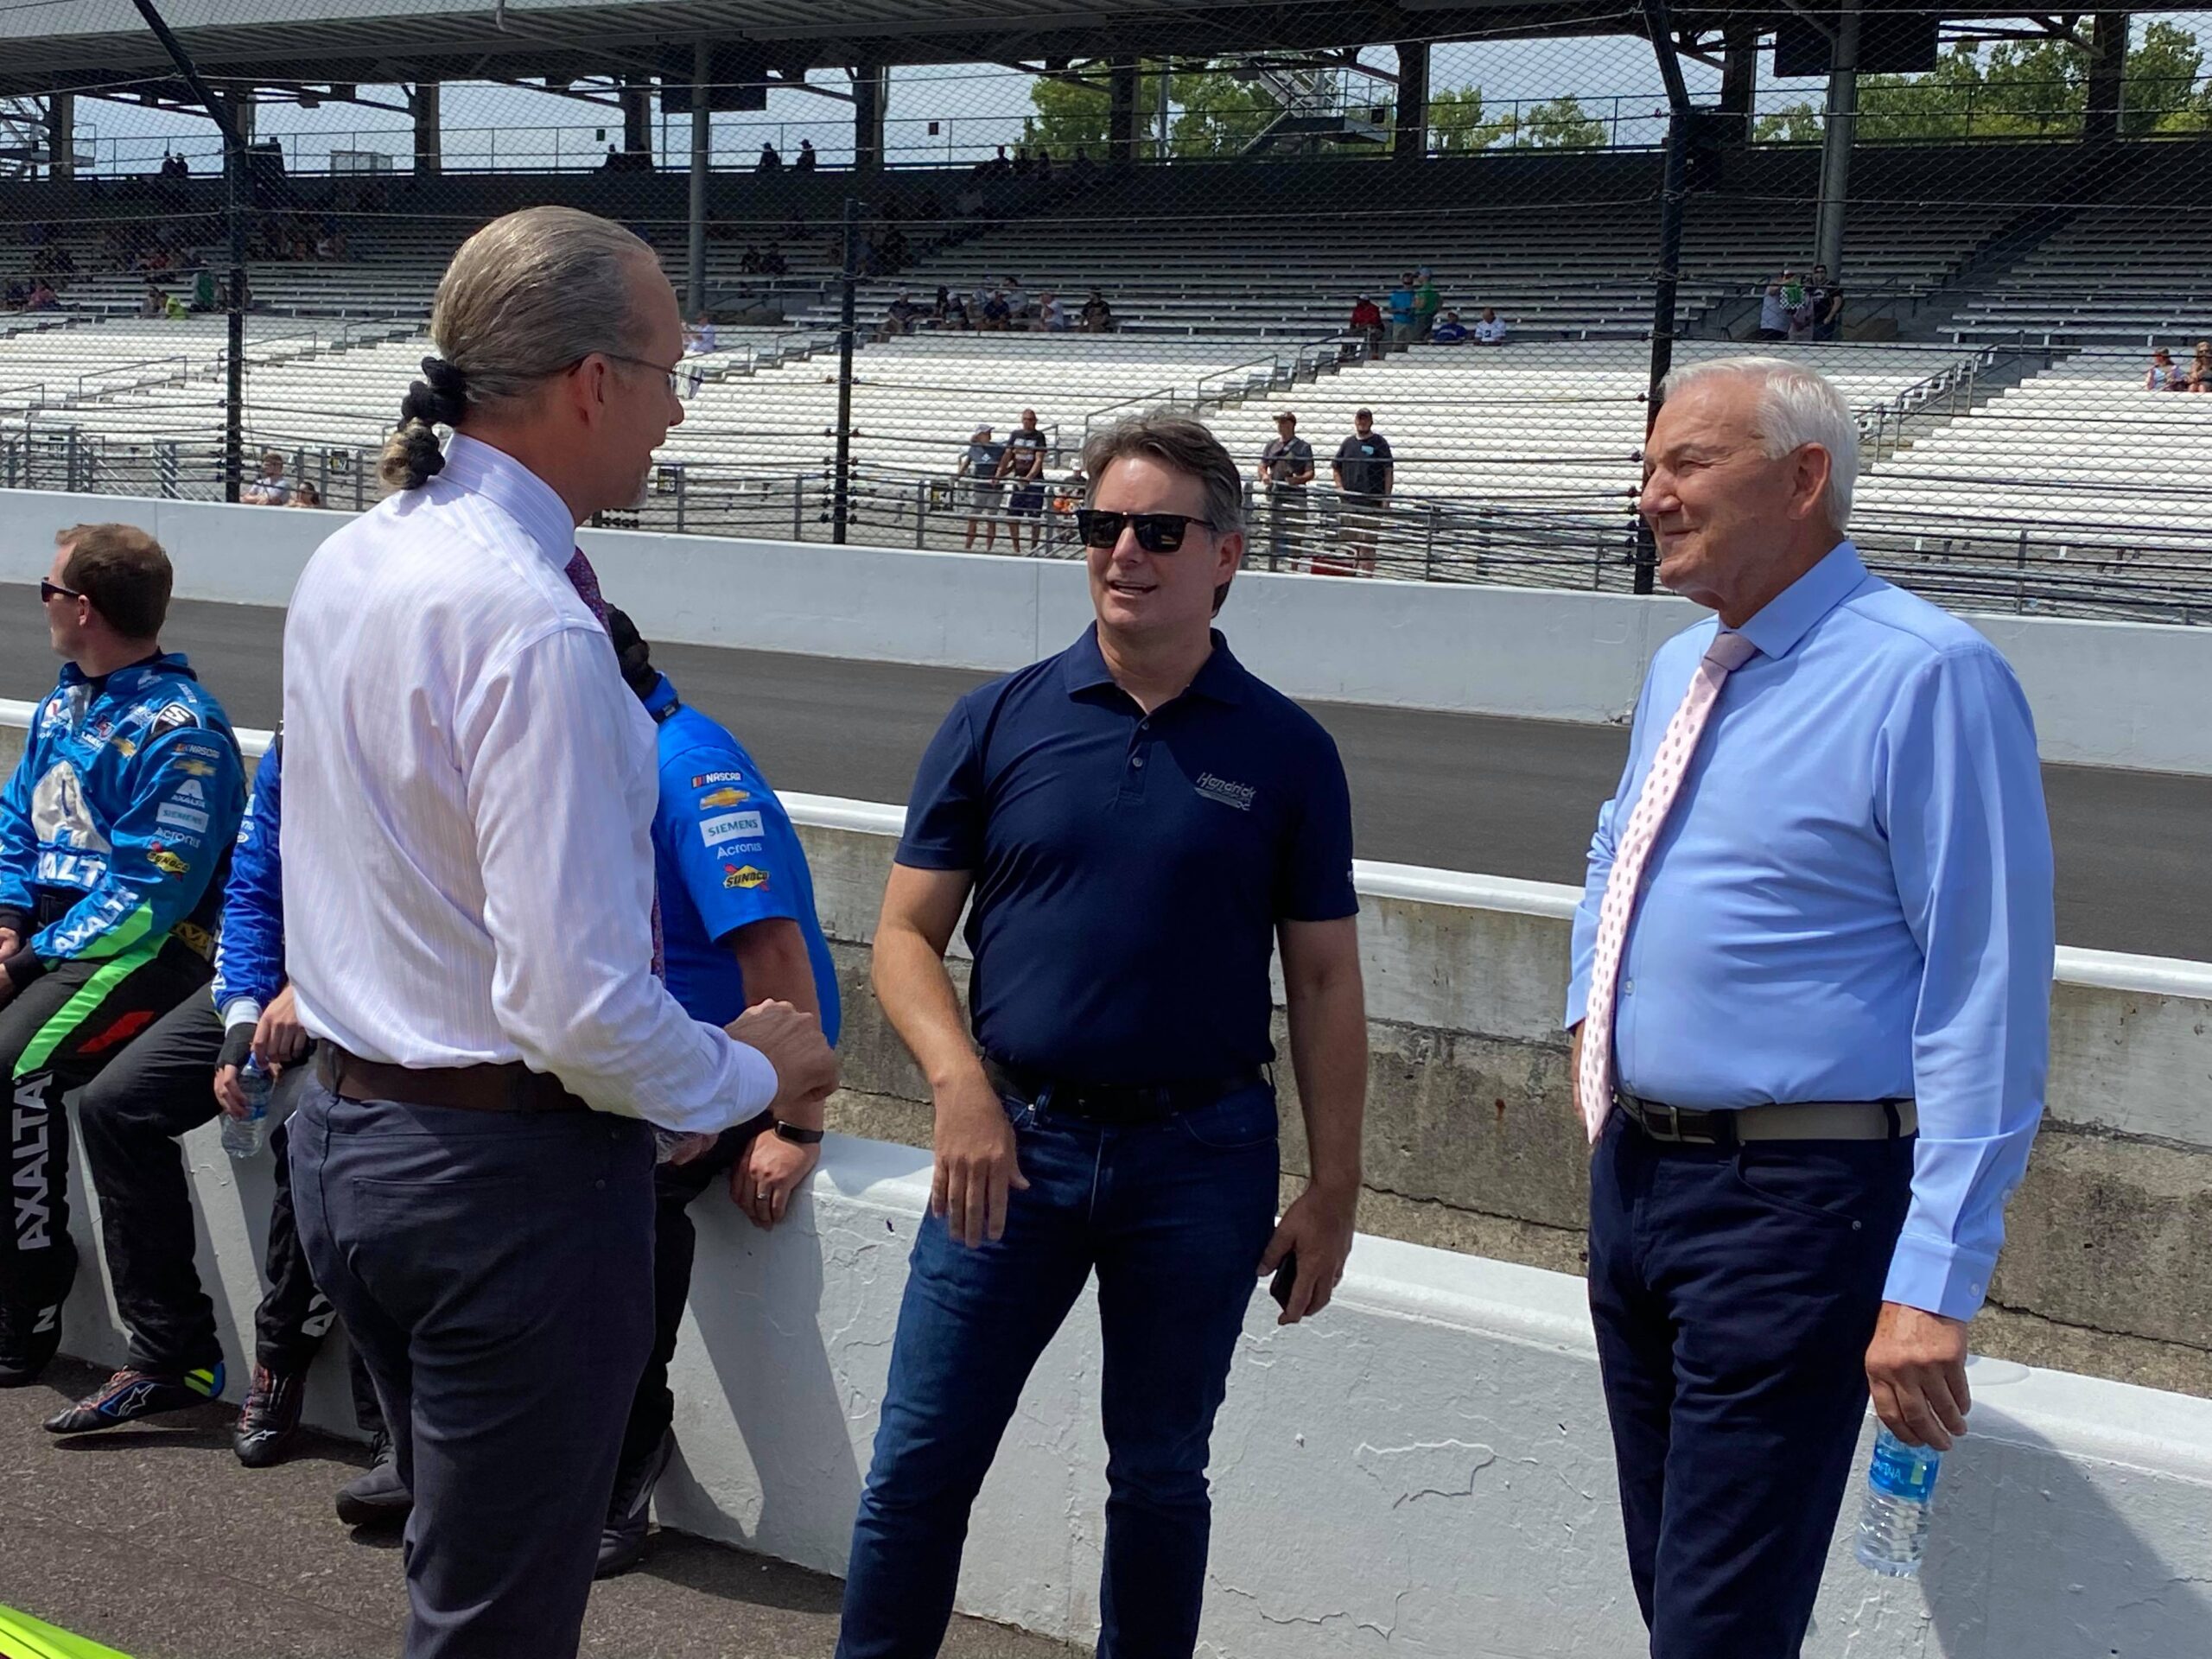 Nowadays, Dale Jarrett continues his friendships with Jeff Gordon and Kyle Petty as an NBC Sports analyst. (Photo: Stephen Conley | The Podium Finish)